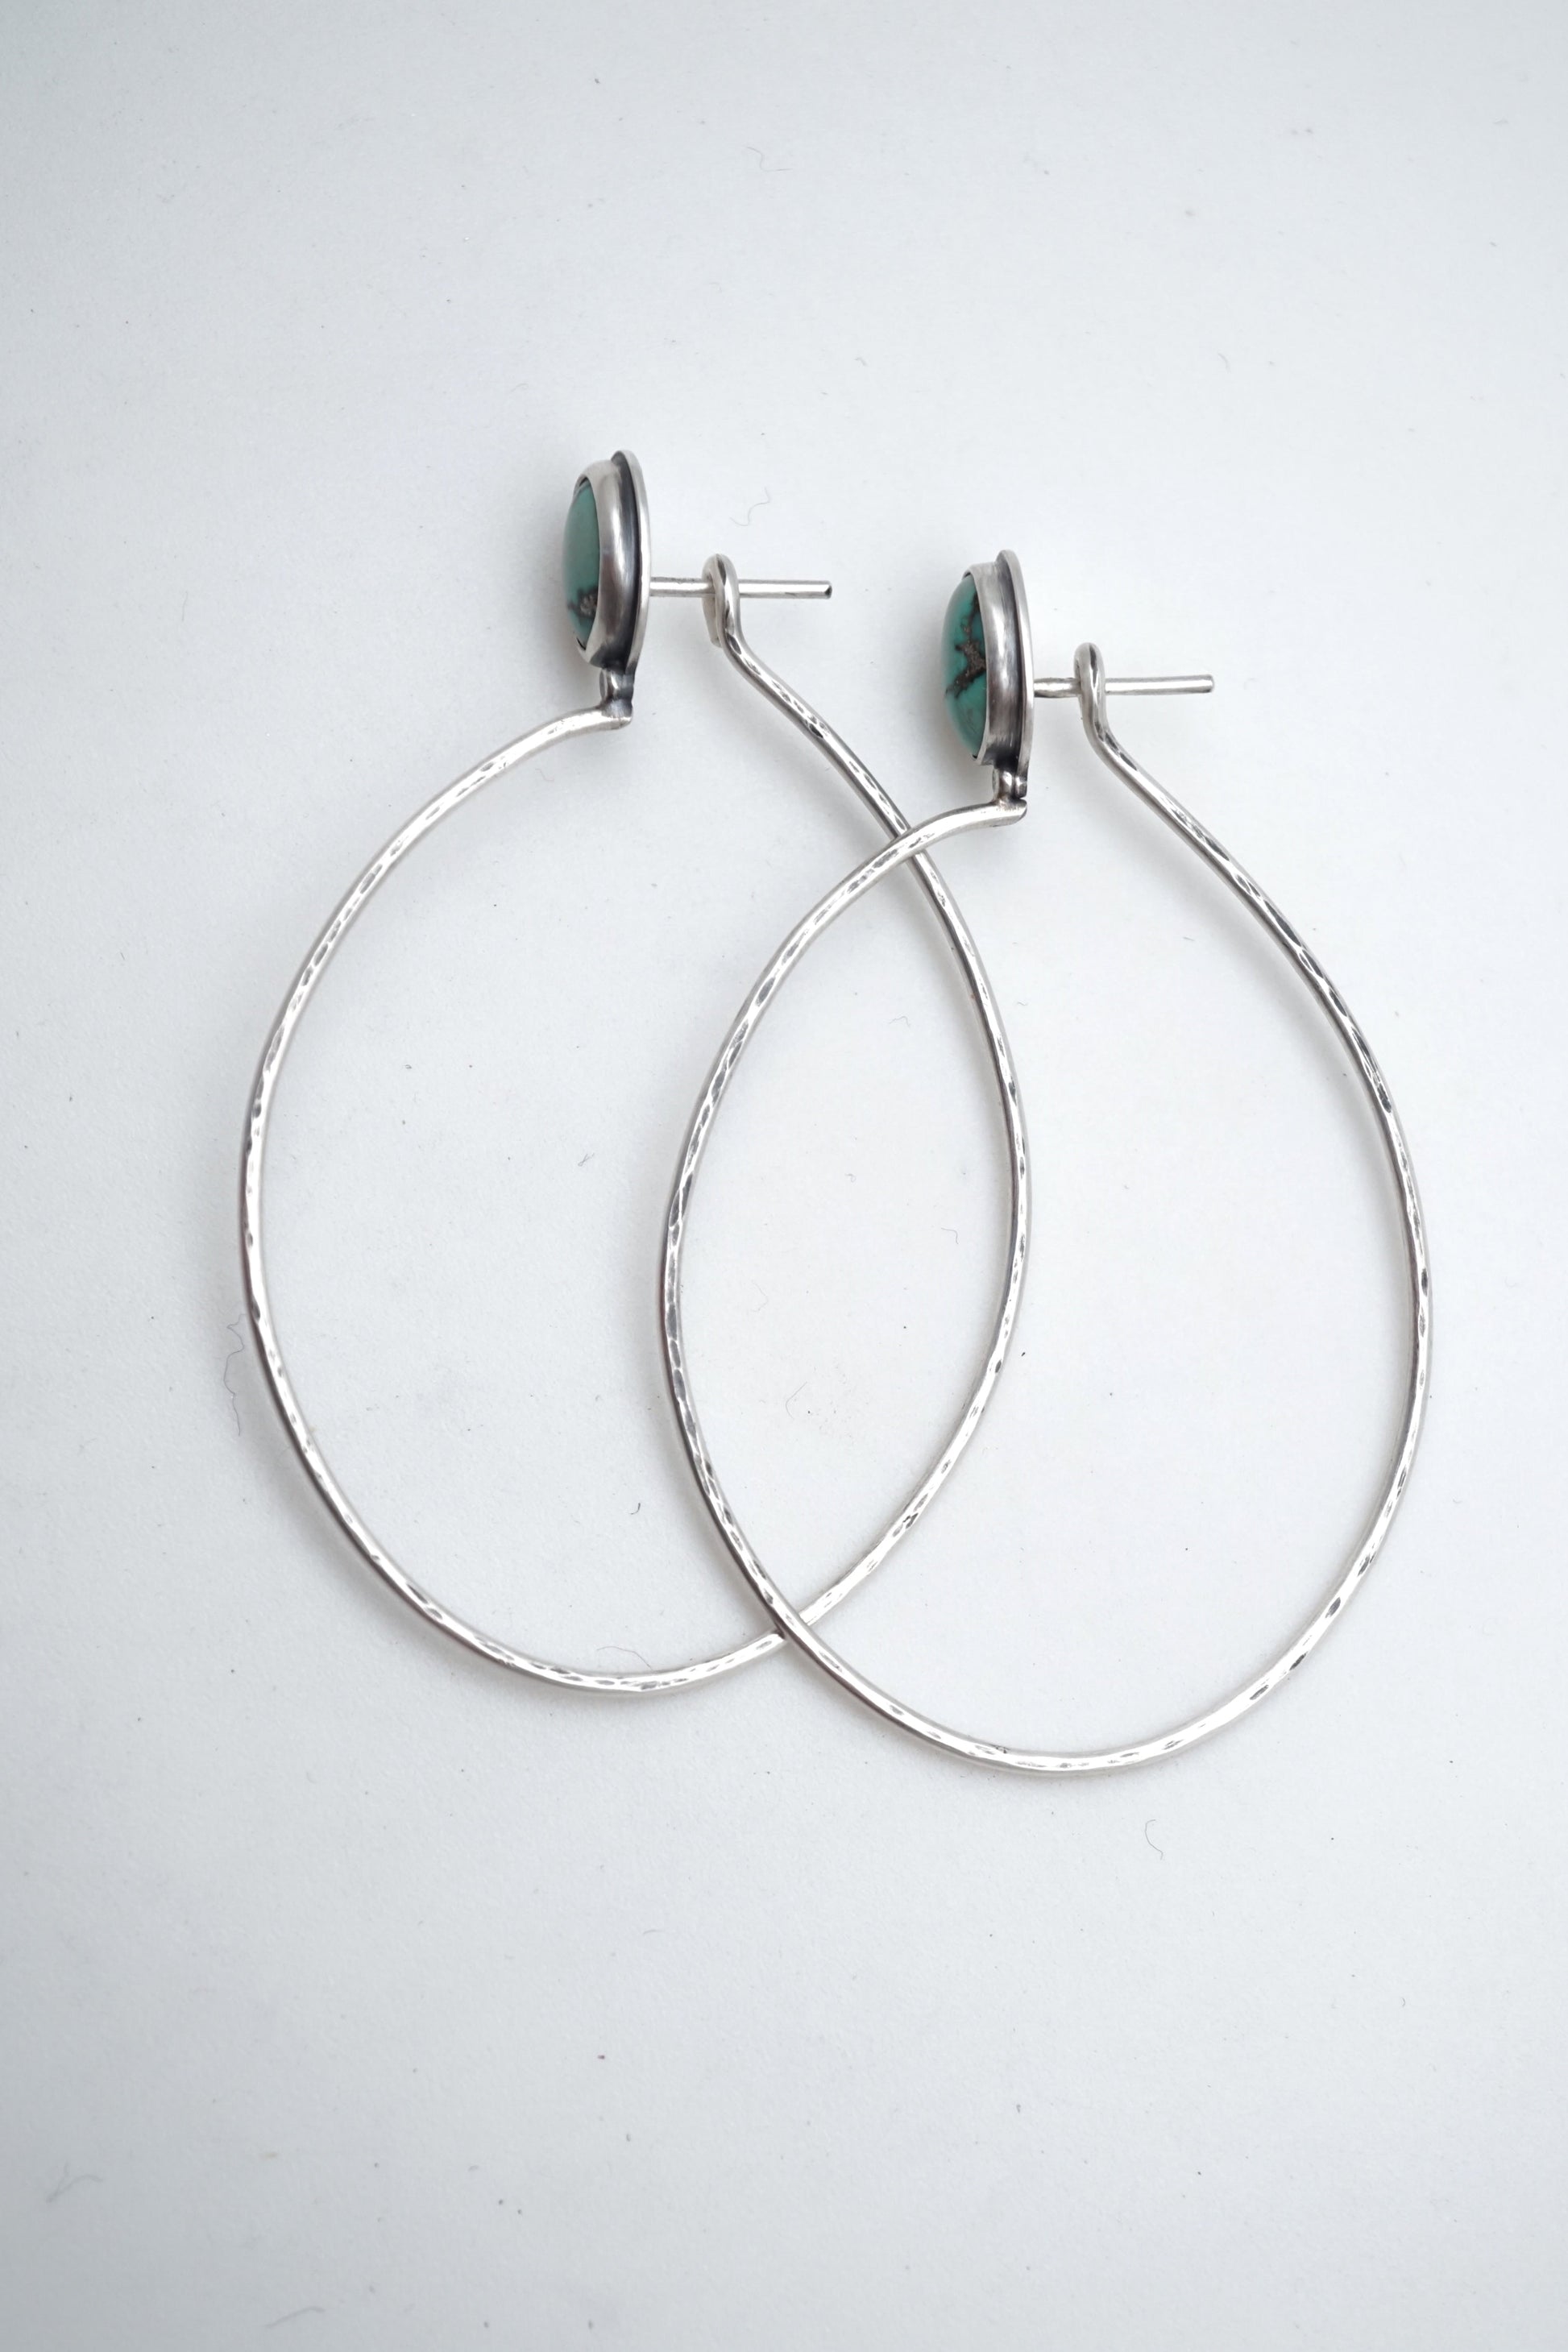 EARRINGS FOR A CAUSE hubei turquoise + silver hoops - Lumenrose